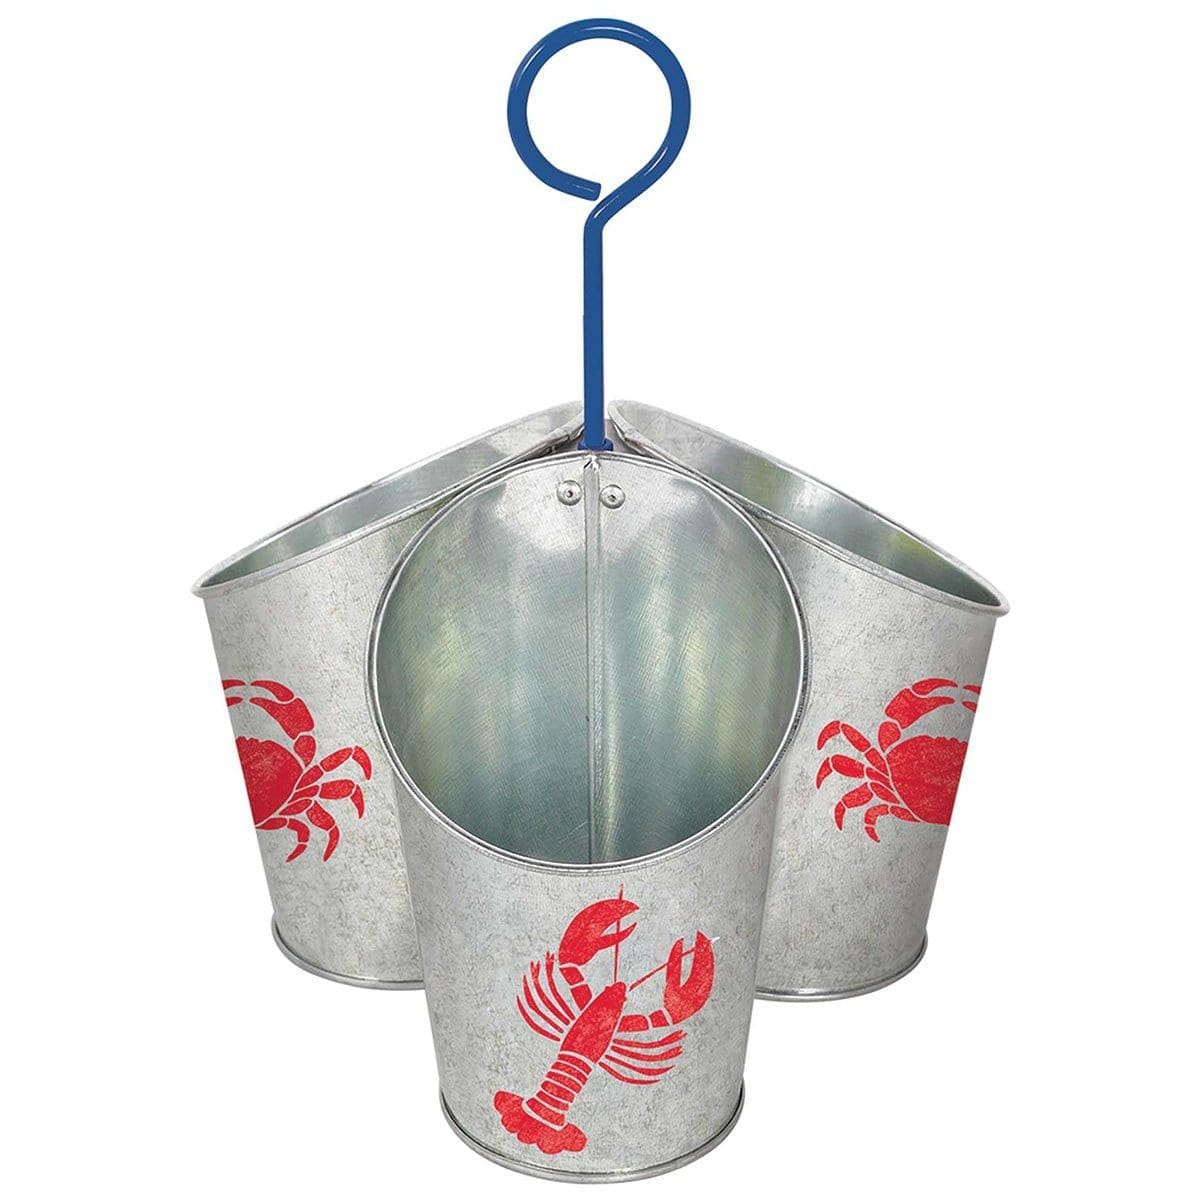 Buy Theme Party Seafood Utensil Caddy sold at Party Expert